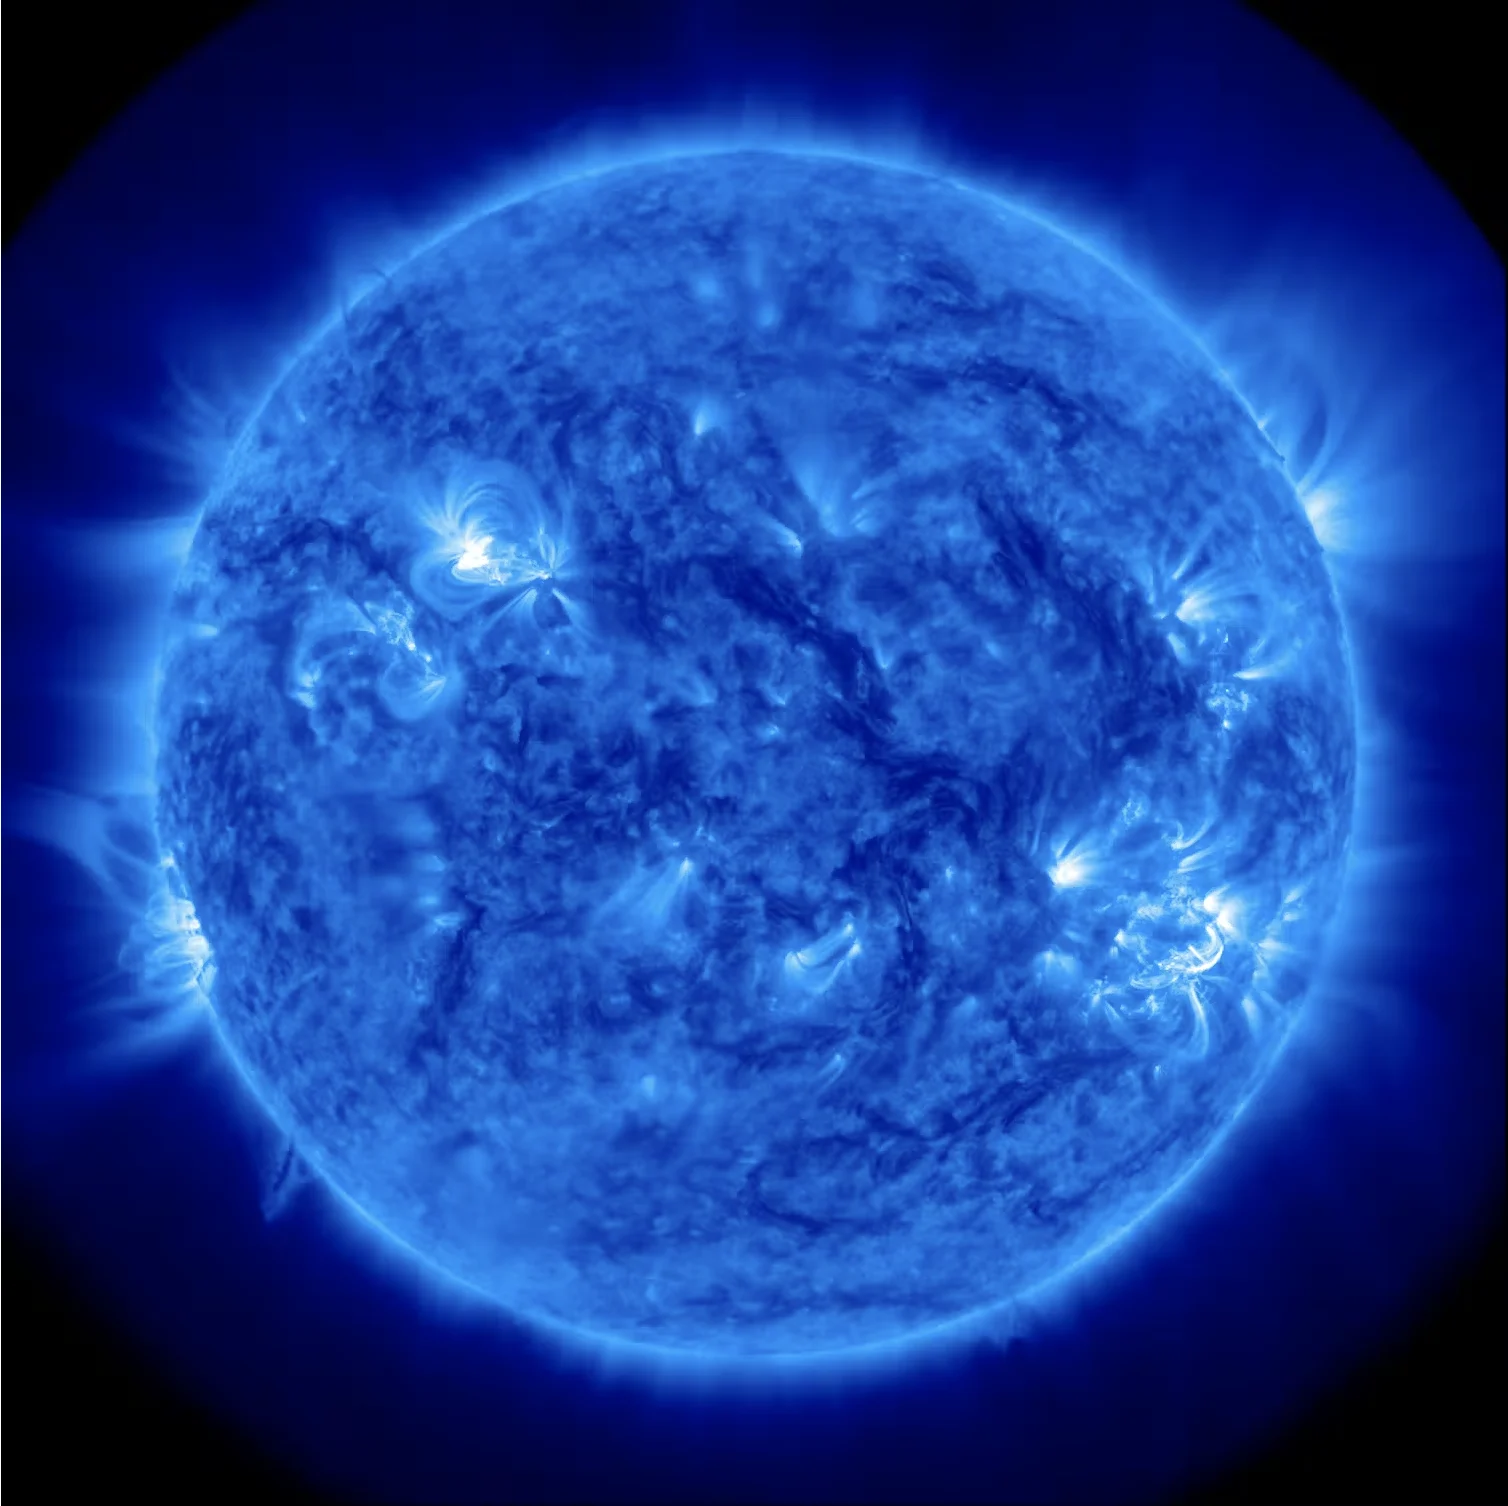 NASA: These active regions may dramatically flare up in X-ray intensity, affecting Earth’s upper atmosphere and making a hazard for astronauts. (Solar Dynamics Observatory/NASA)